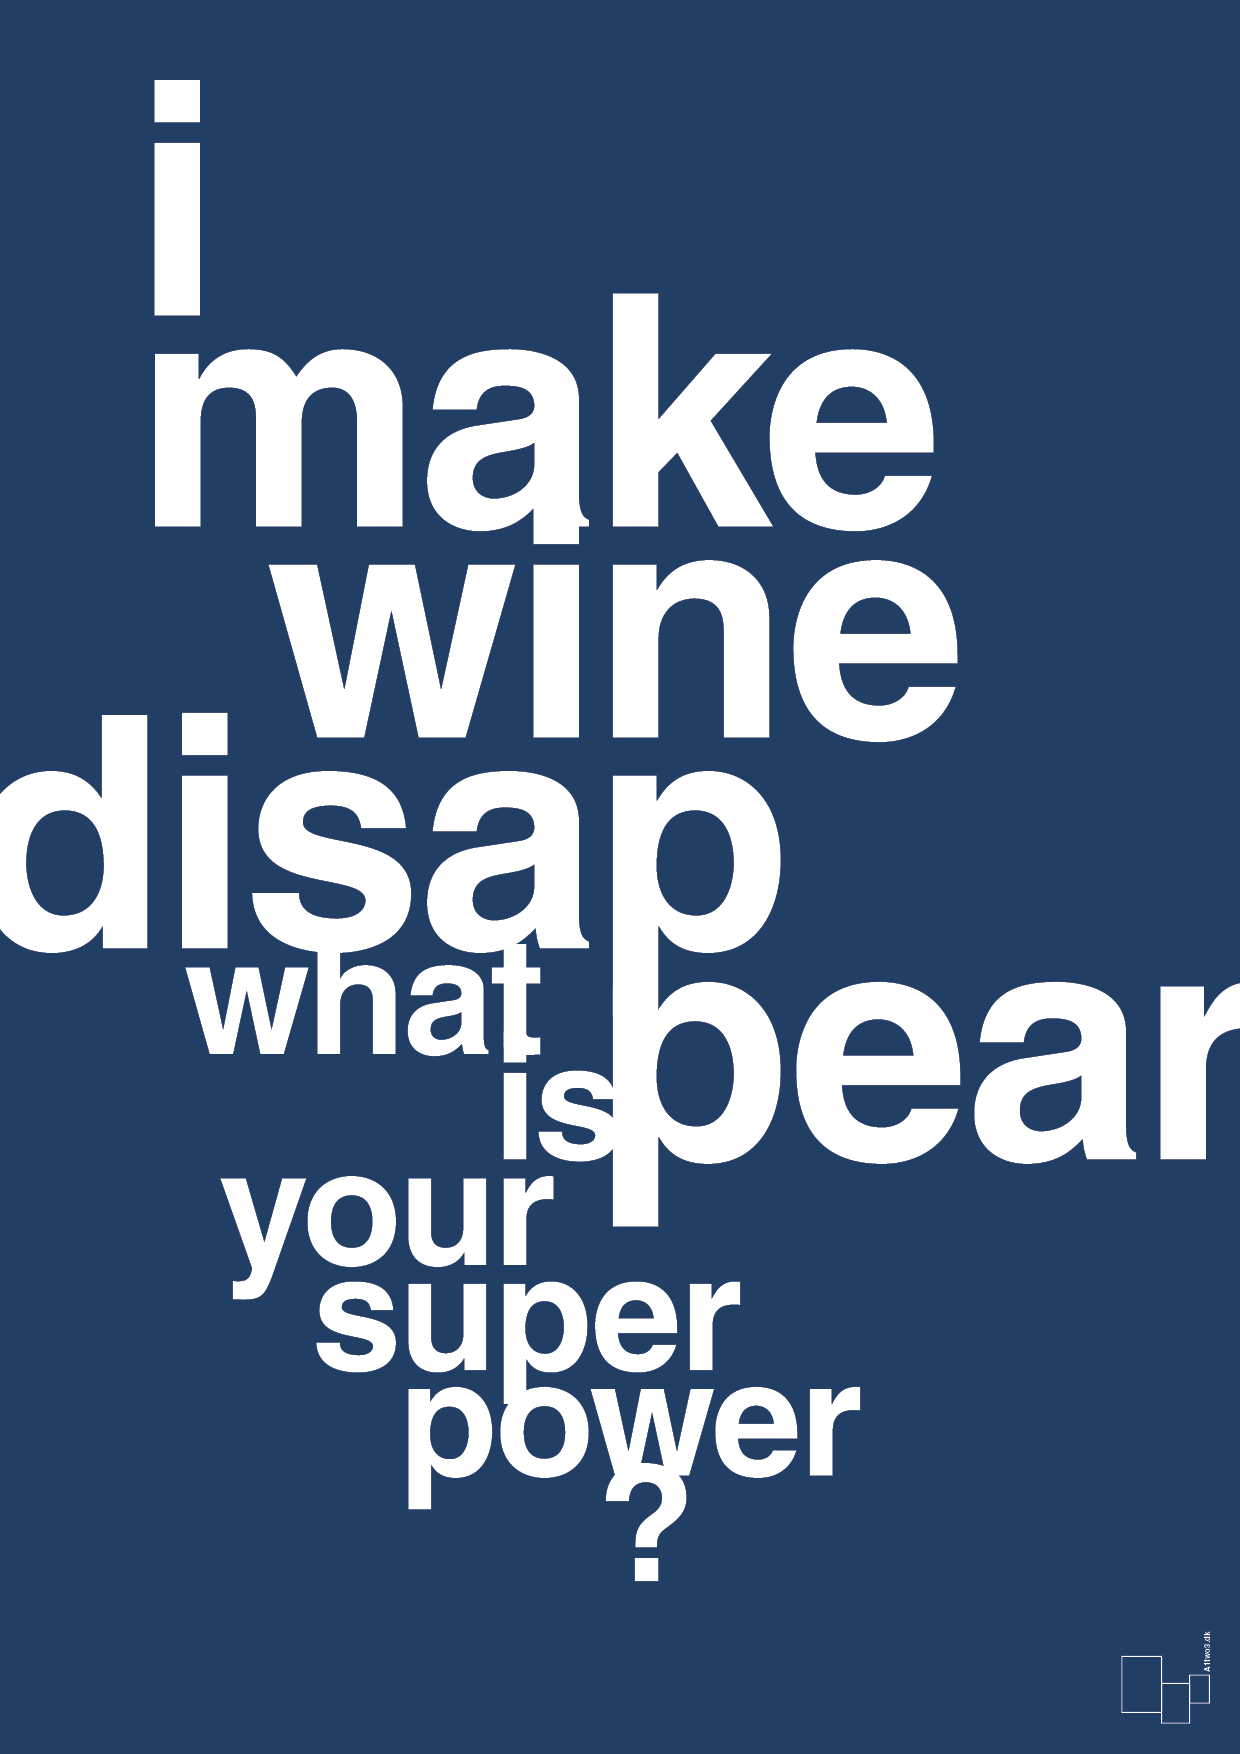 i make wine disappear what is your super power - Plakat med Mad & Drikke i Lapis Blue